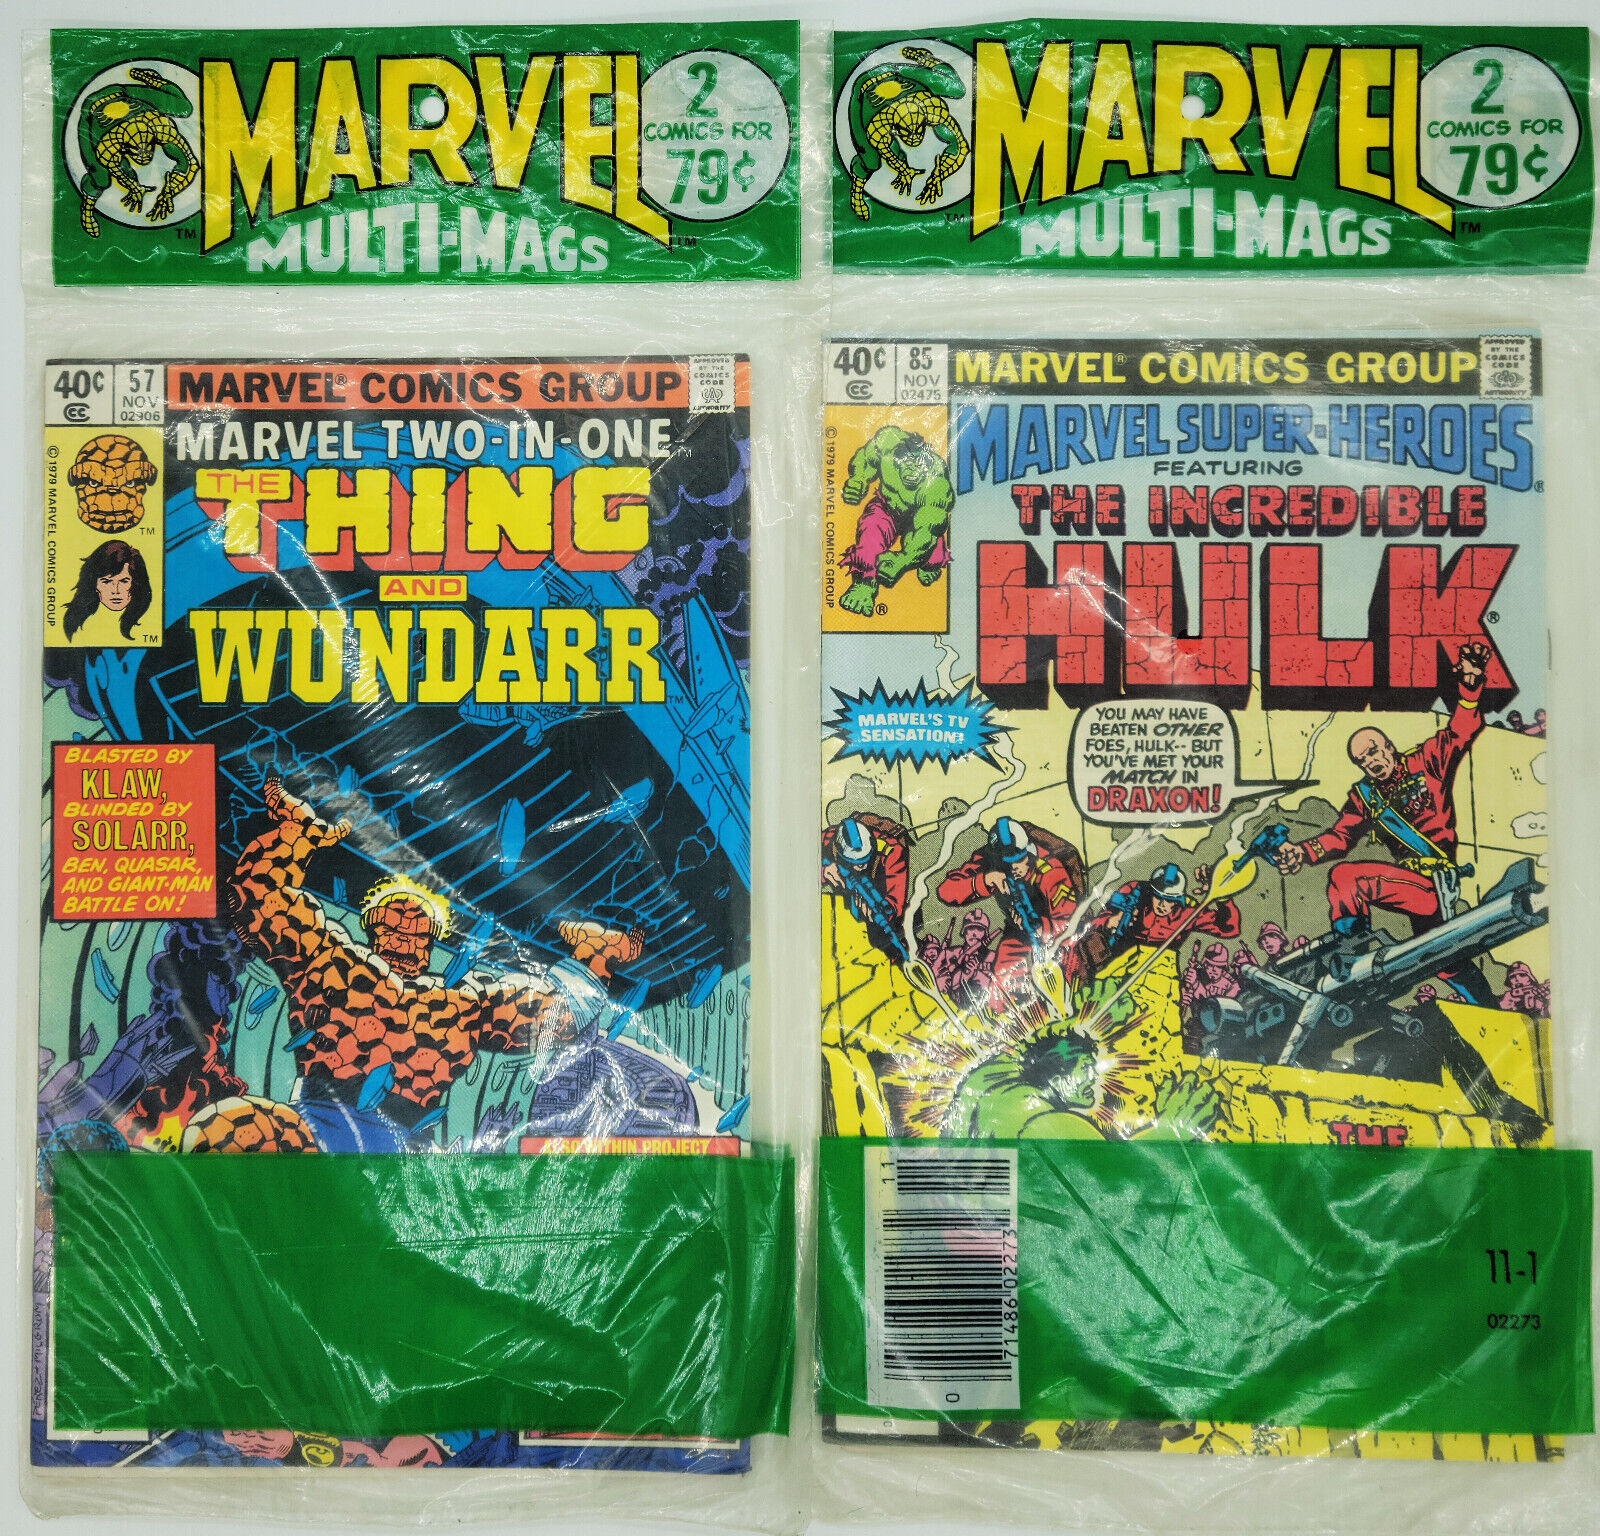 Marvel Multi-Mags (Marvel Two-In-One #57/Marvel Super-Heroes-Hulk #85) 1979 RARE